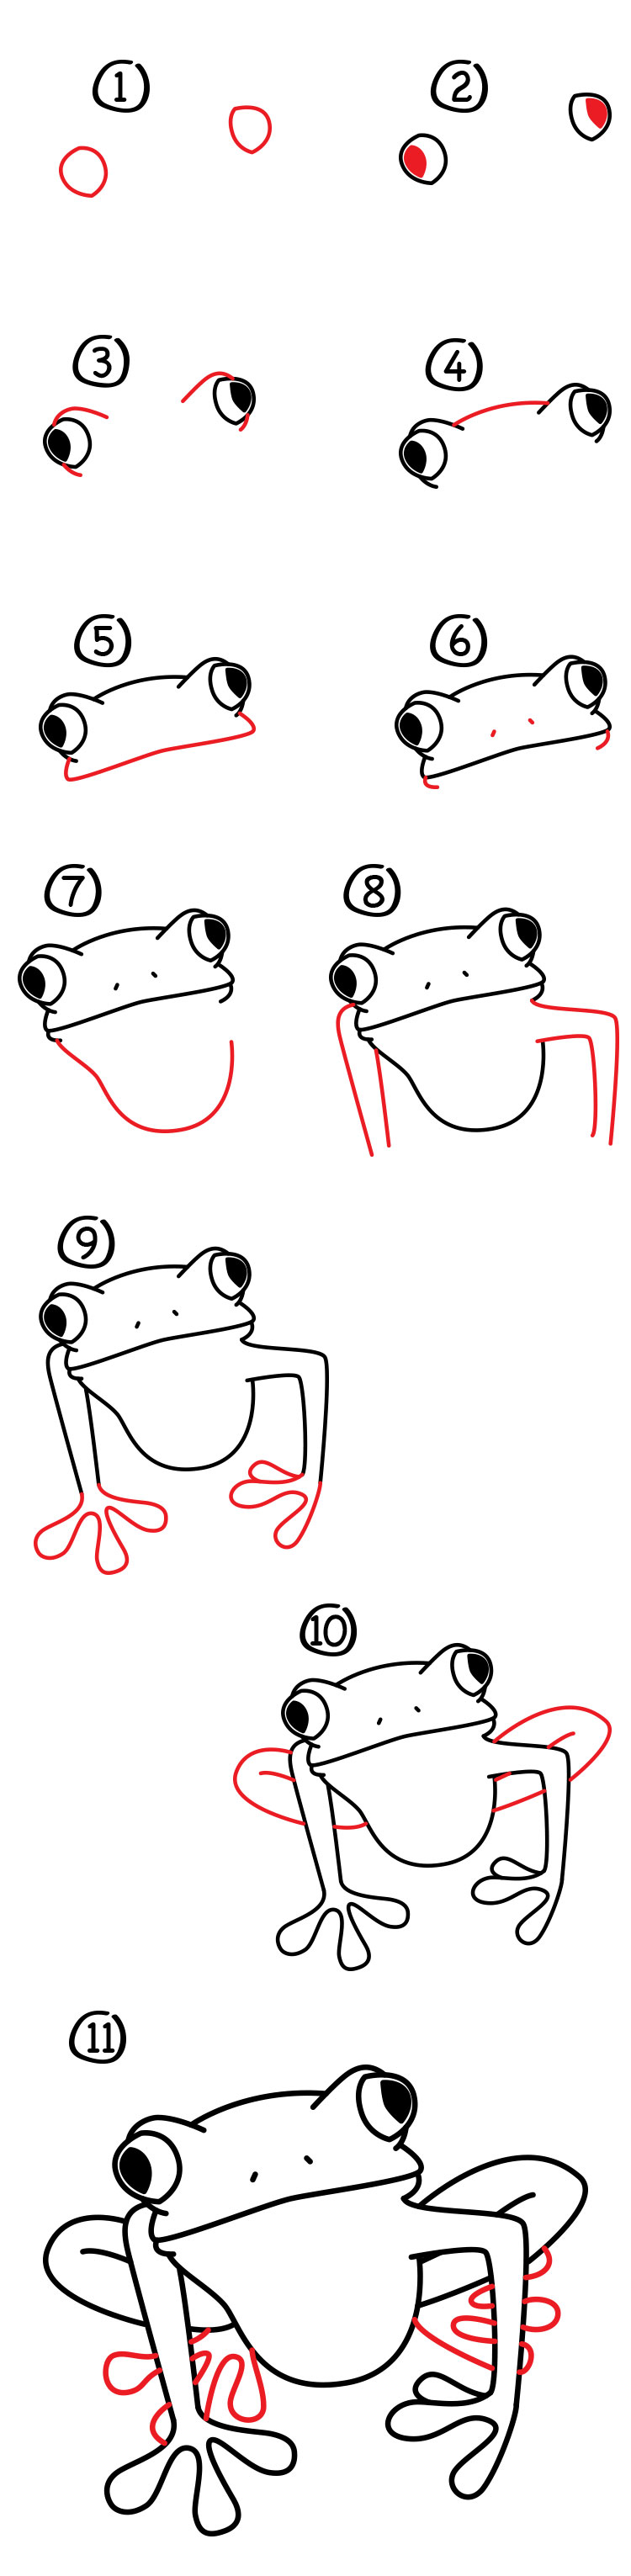 How To Draw A Tree Frog